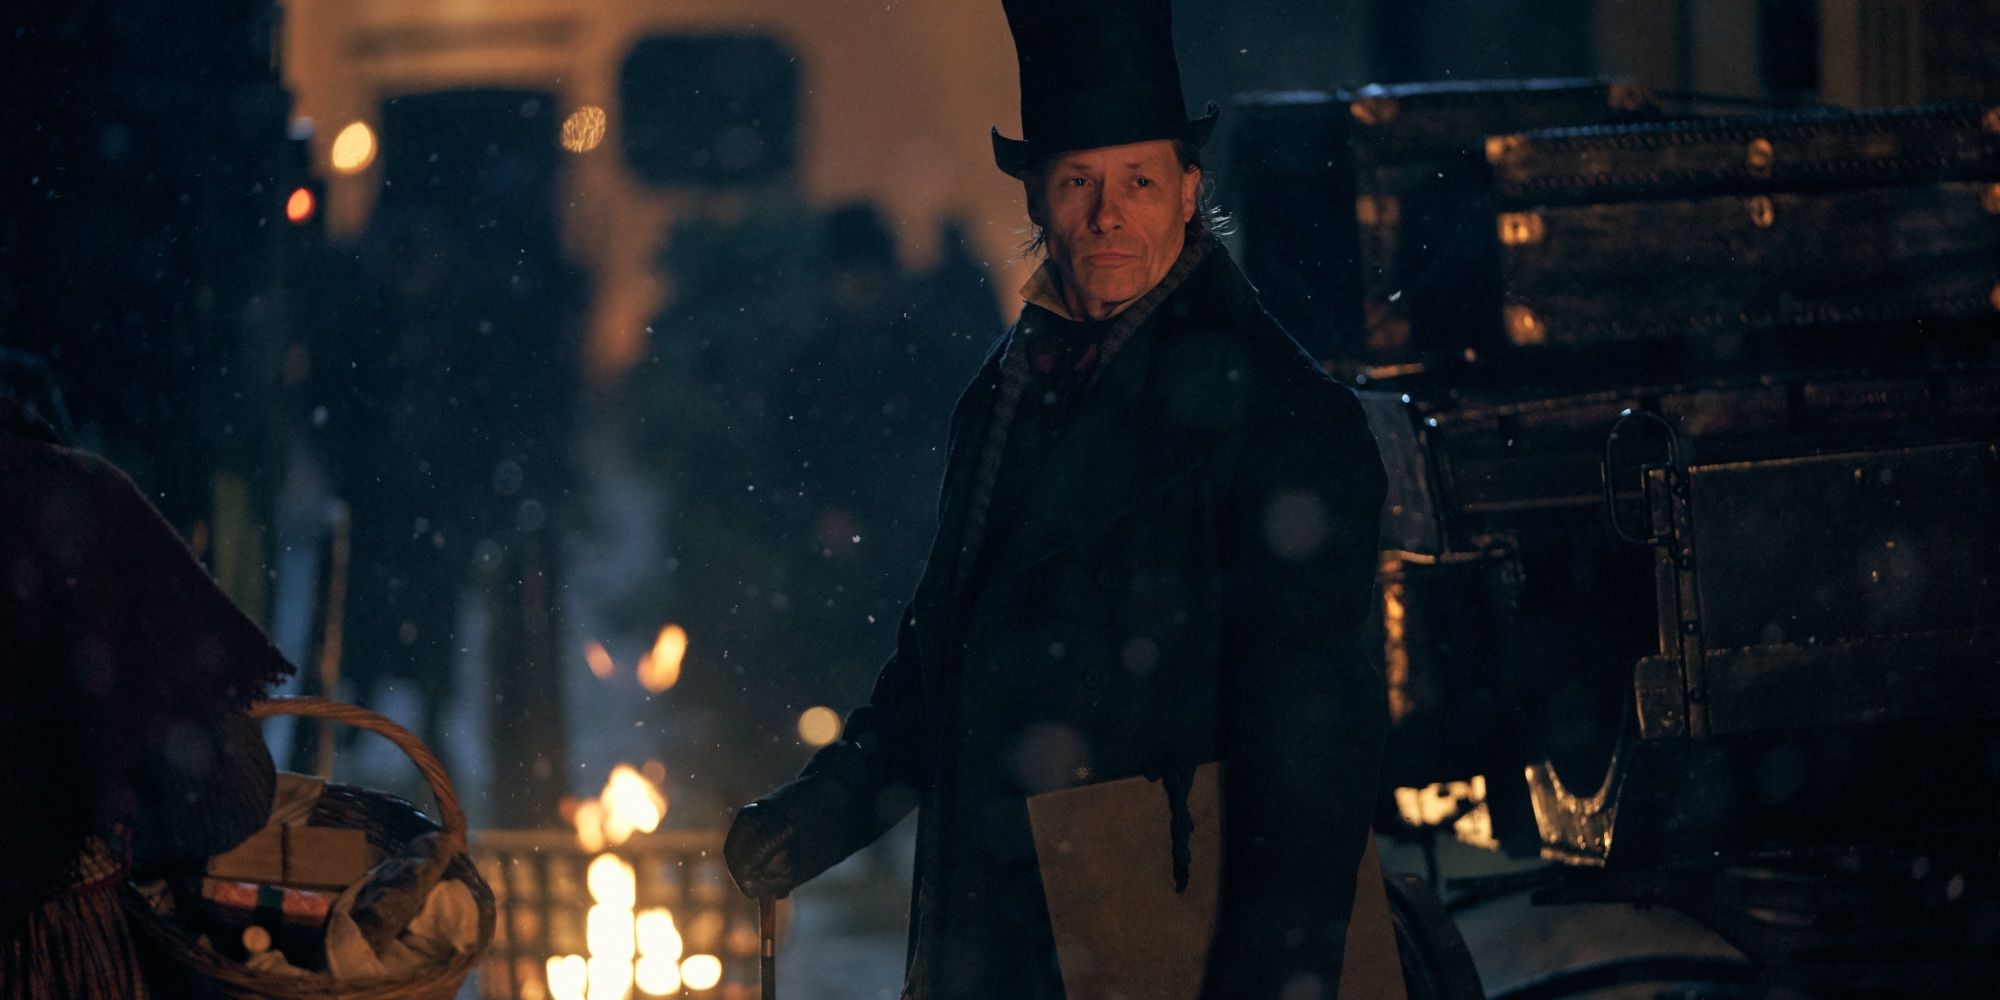 Christmas Carol 2019: 10 Hidden Details Everyone Missed In The BBC & FX Version